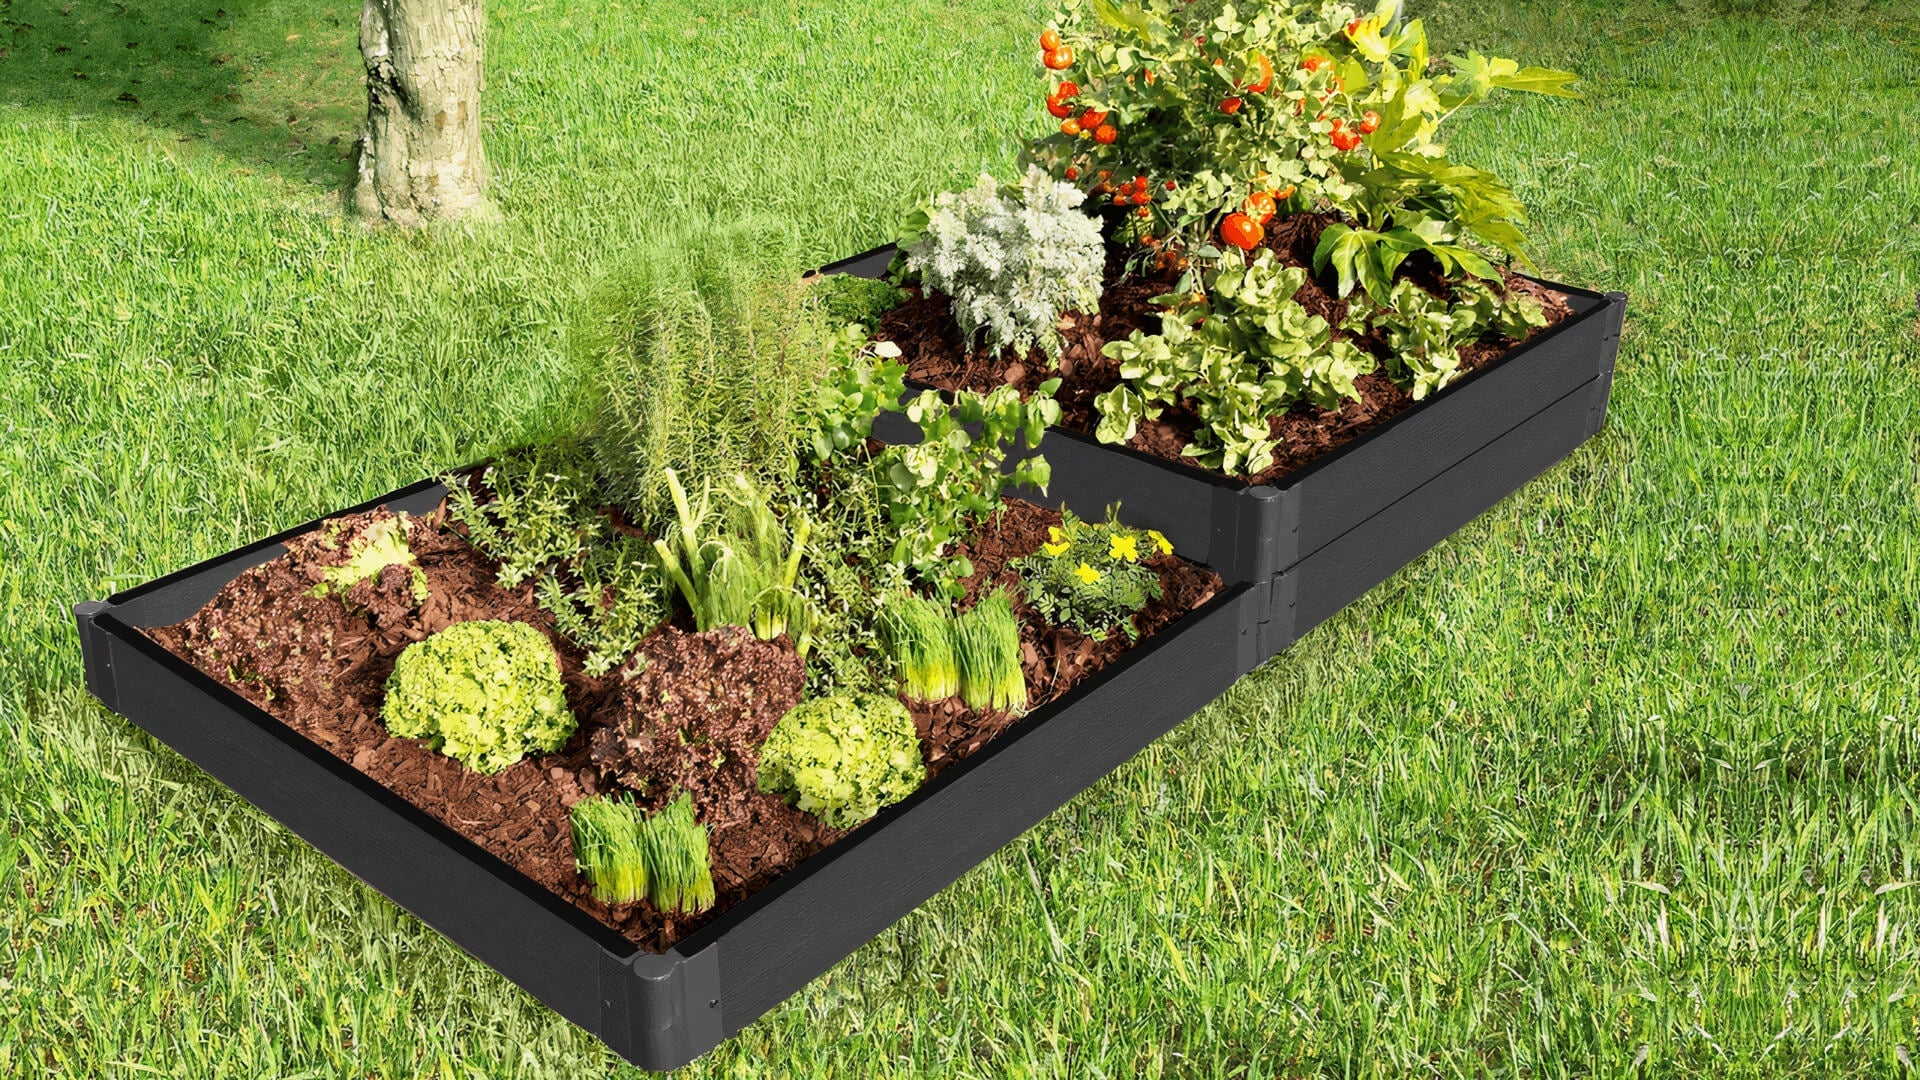 'Stepper' - 4’ x 8’ x 11" Terrace Garden Raised Bed (Double Tier) Raised Garden Beds Frame It All Weathered Wood 2" 